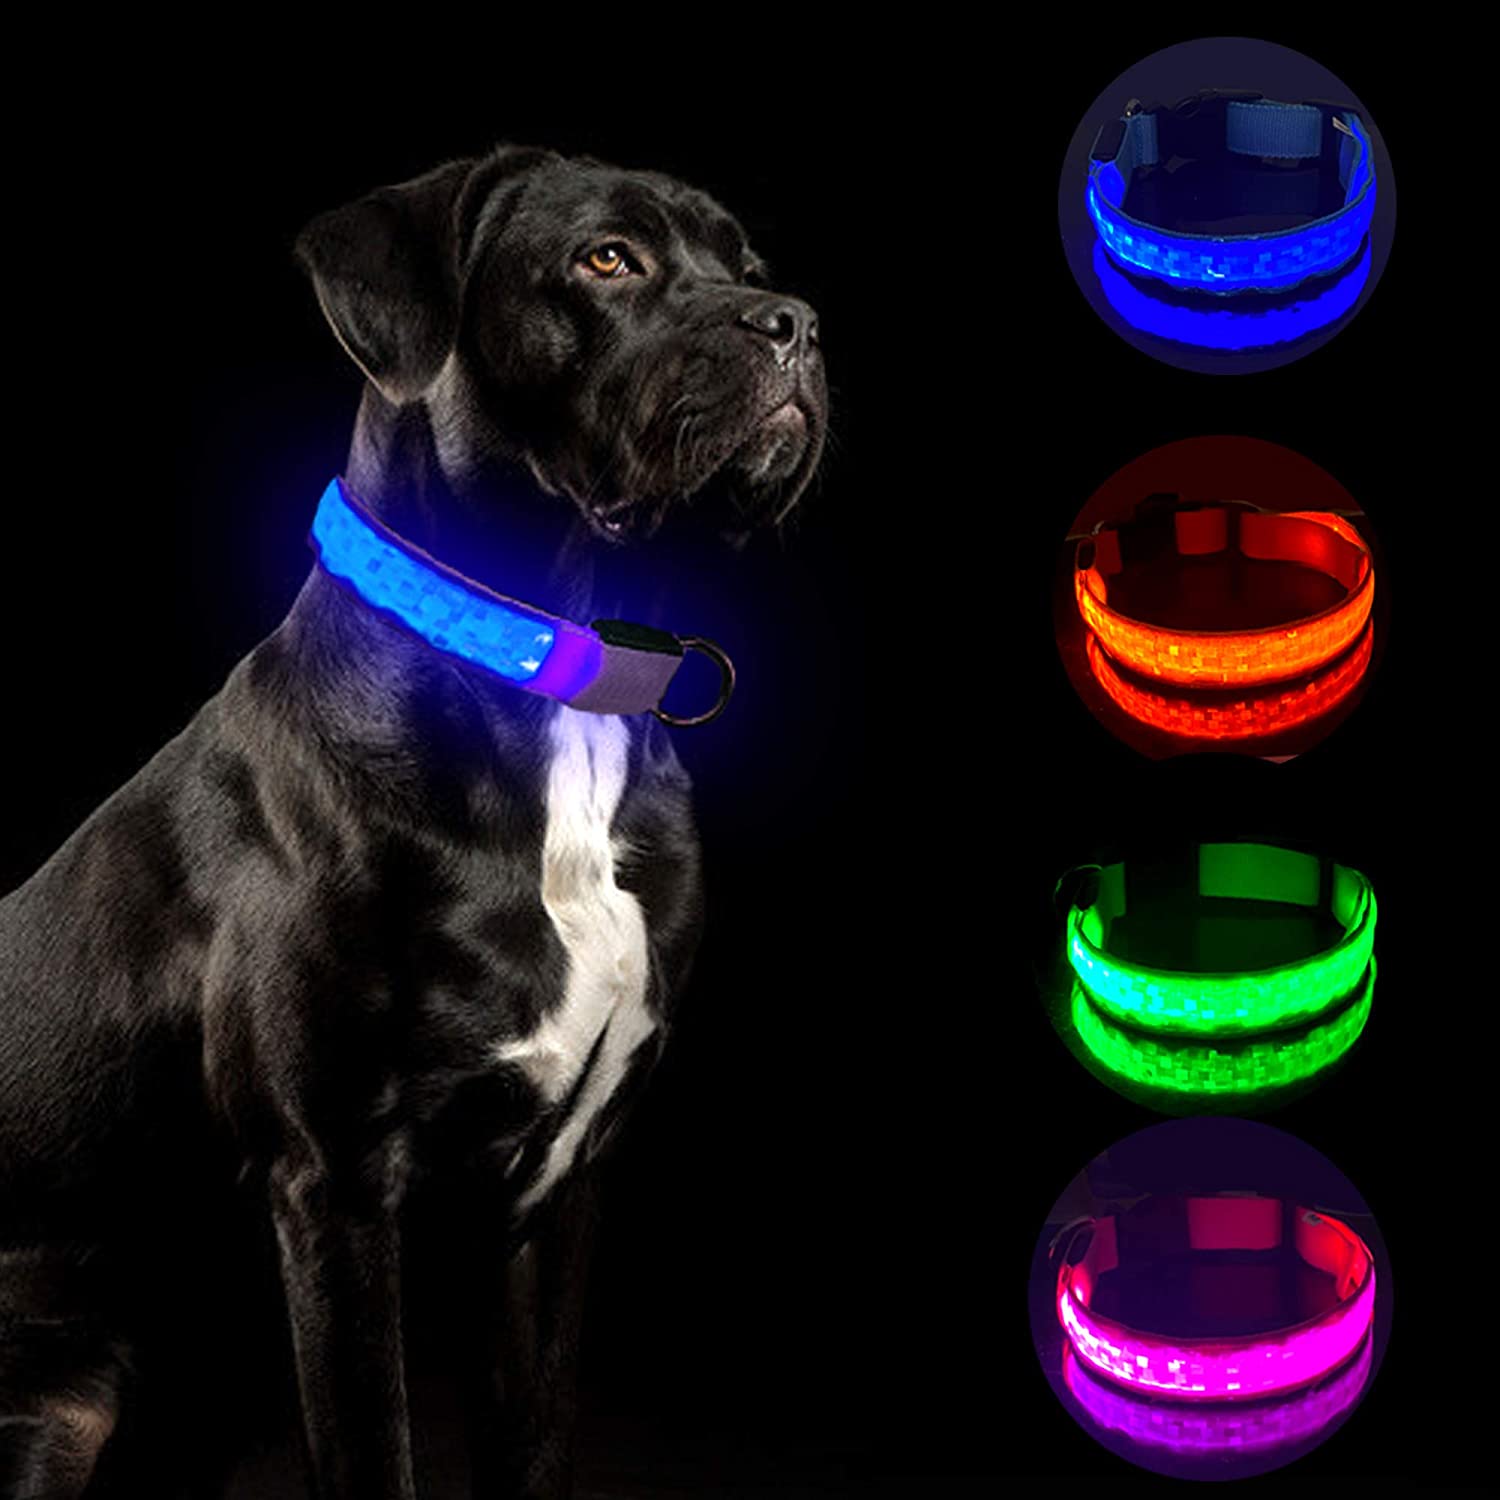 Tekkery Light Up Dog Collar, Glowing Pet Dog Collar for Night Safety with USB Rechargeable Super Bright LED Dog Flashing Collar for Small Medium Large Dogs